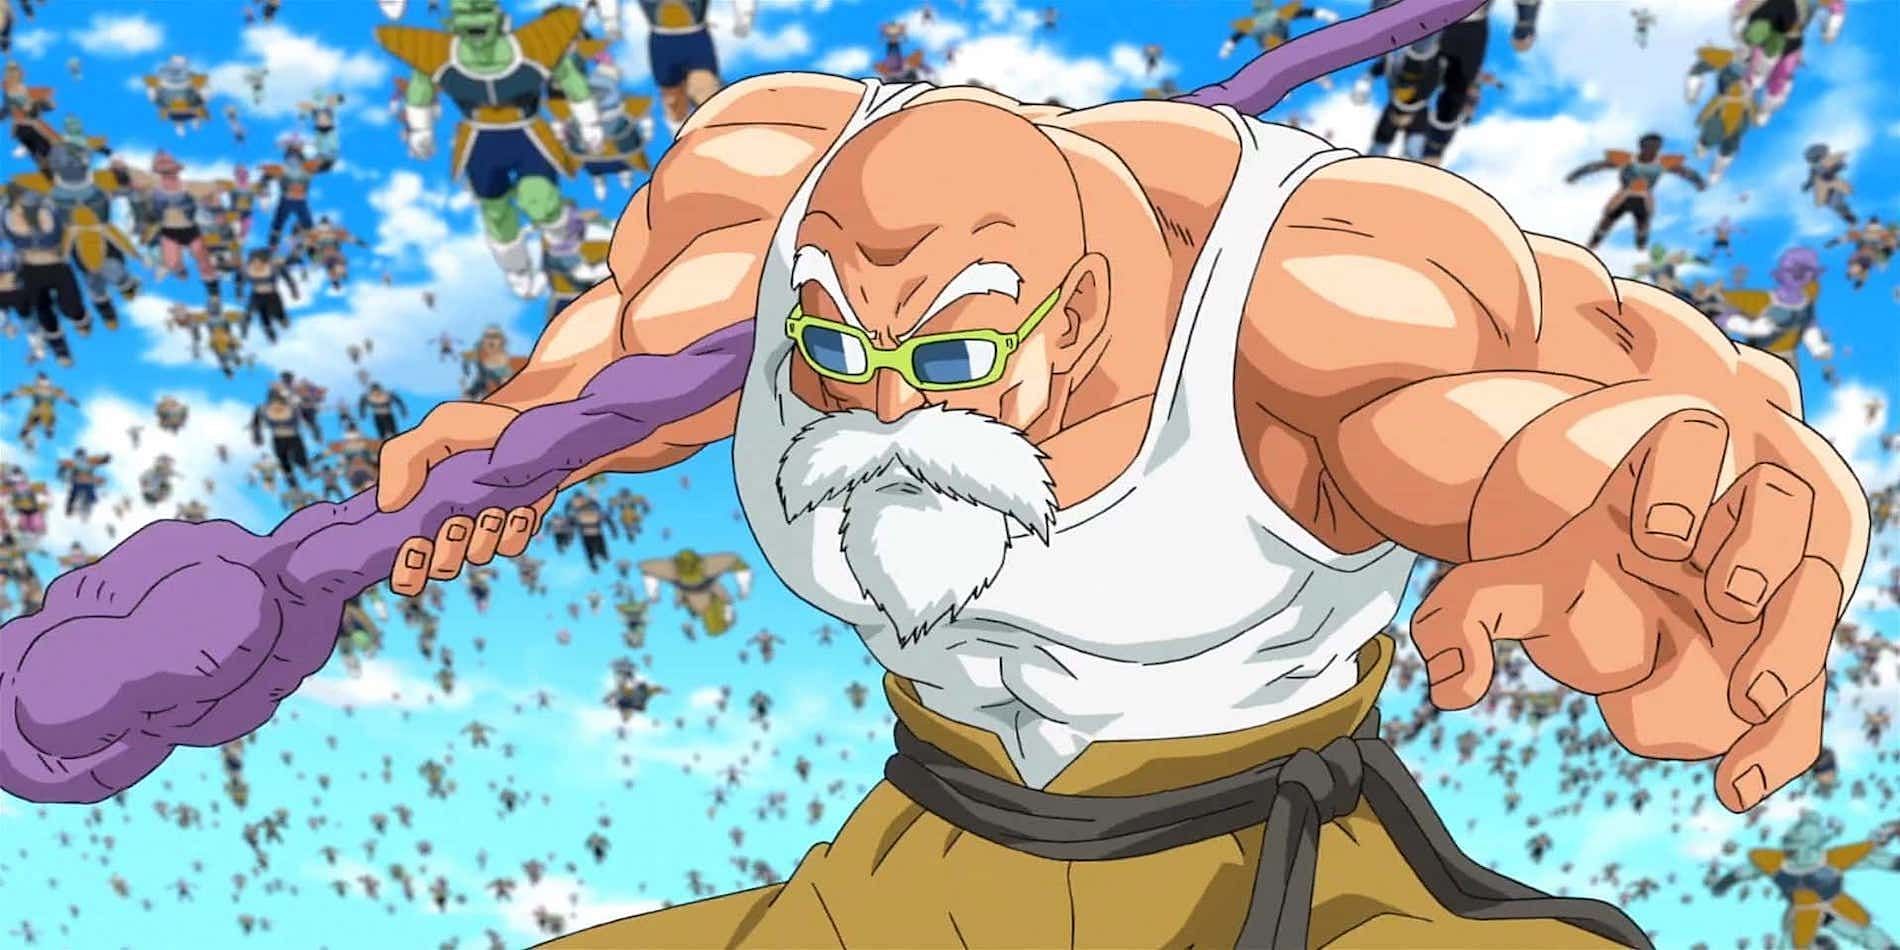 Master Roshi in his buff form as he appears in Dragon Ball Super (Image via Toei Animation)